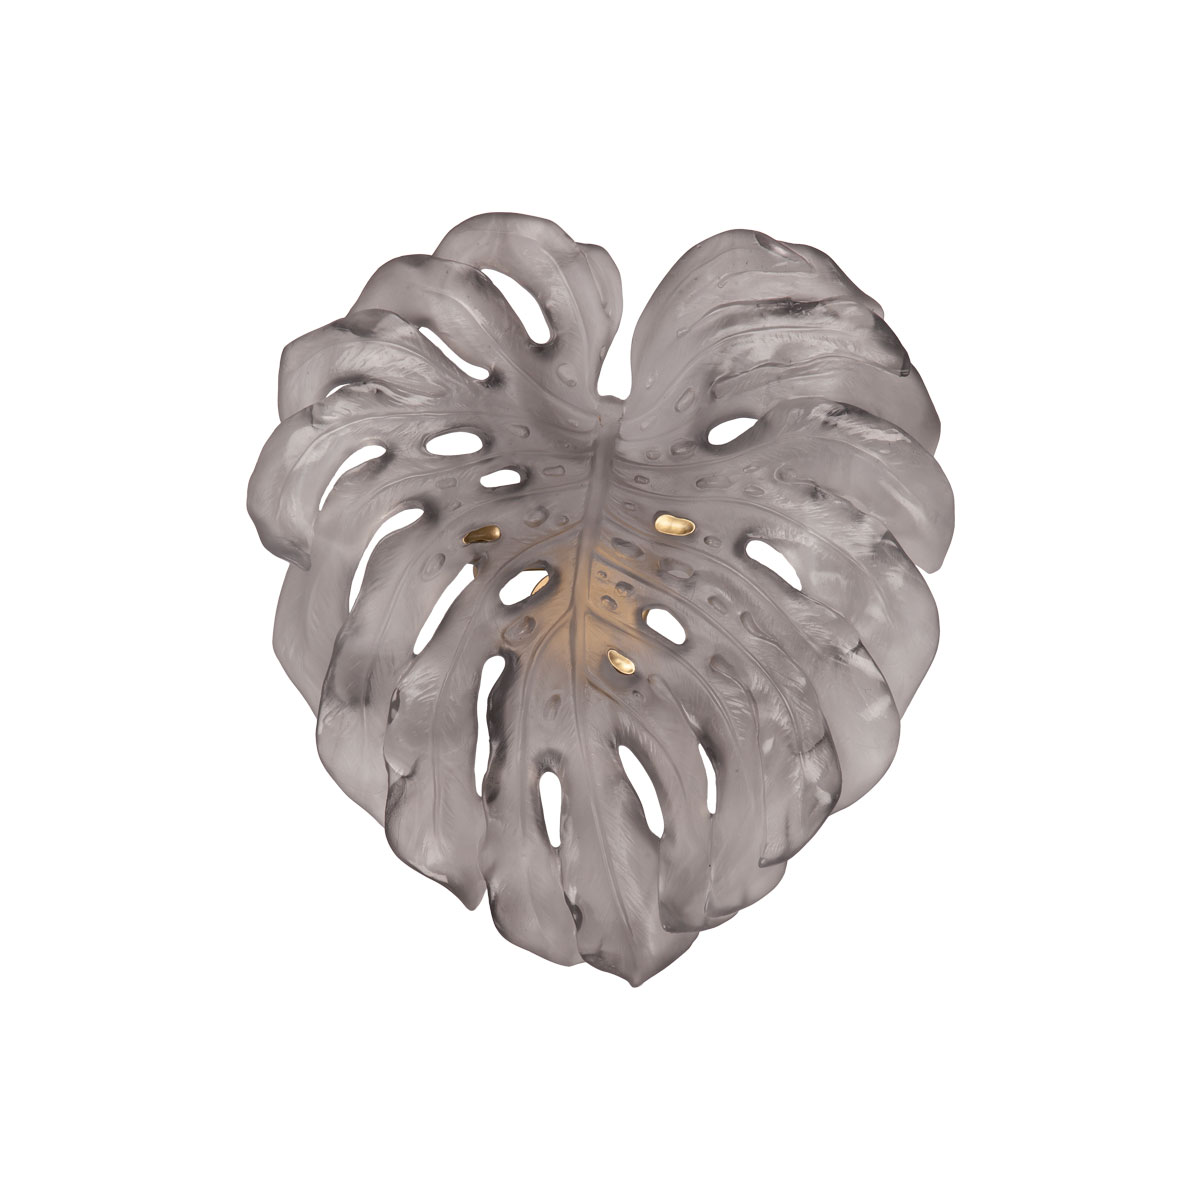 Daum Small Short-Fixture Monstera Wall Leaf in Grey by Emilio Robba, Sconce